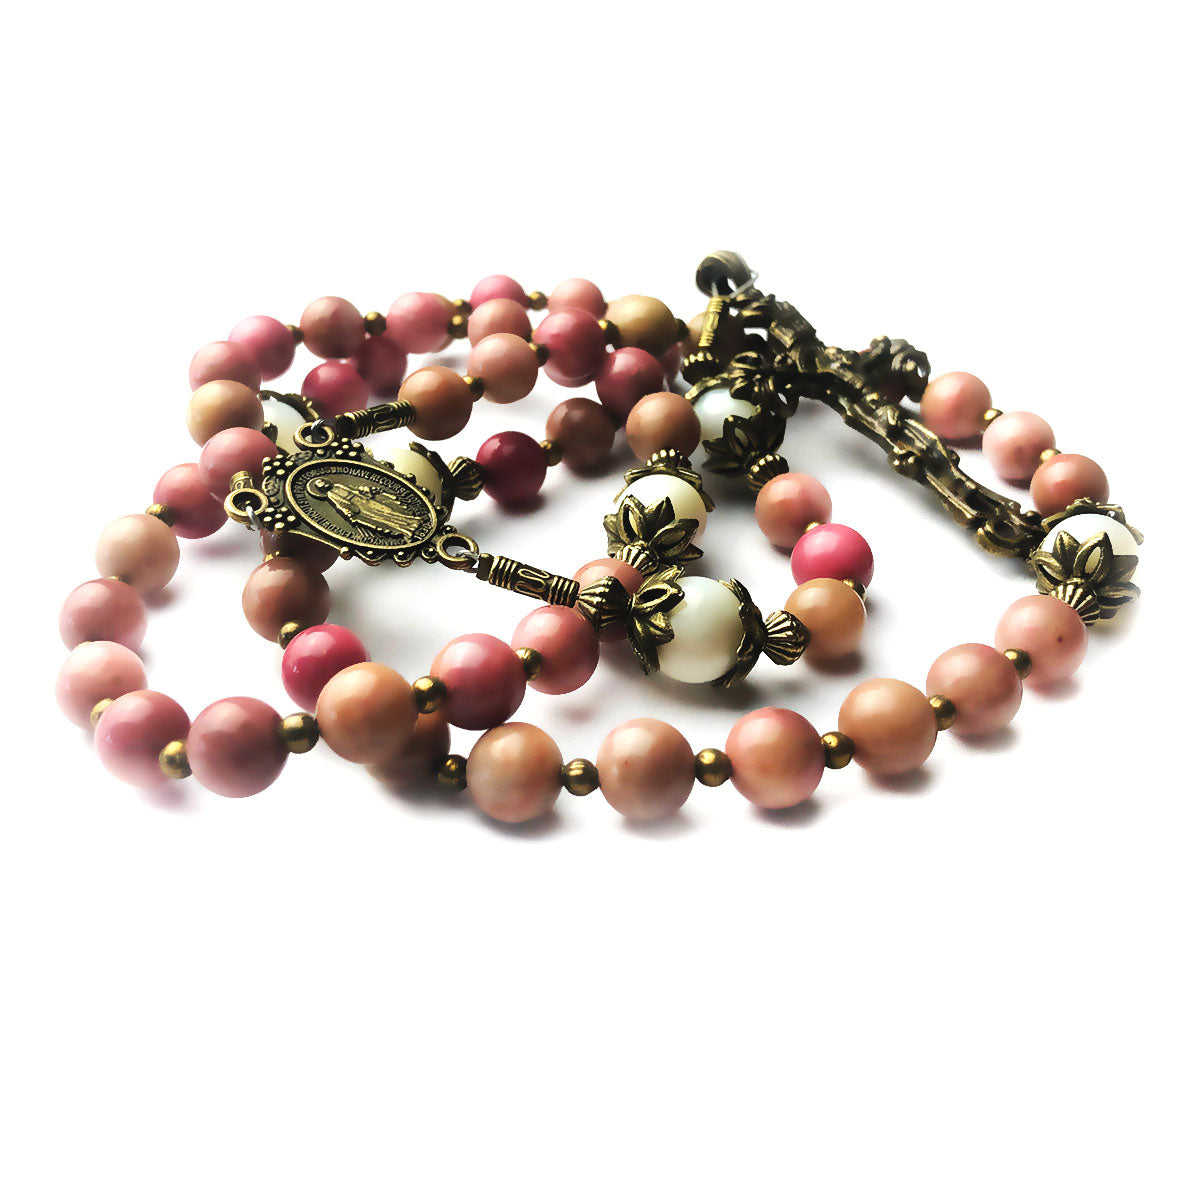 Pink Rhodonite and Mother of Pearl Stone Rosary With Miraculous Medal by Catholic Heirlooms - Confirmation - Holy Communion Gift - Rosary Necklace